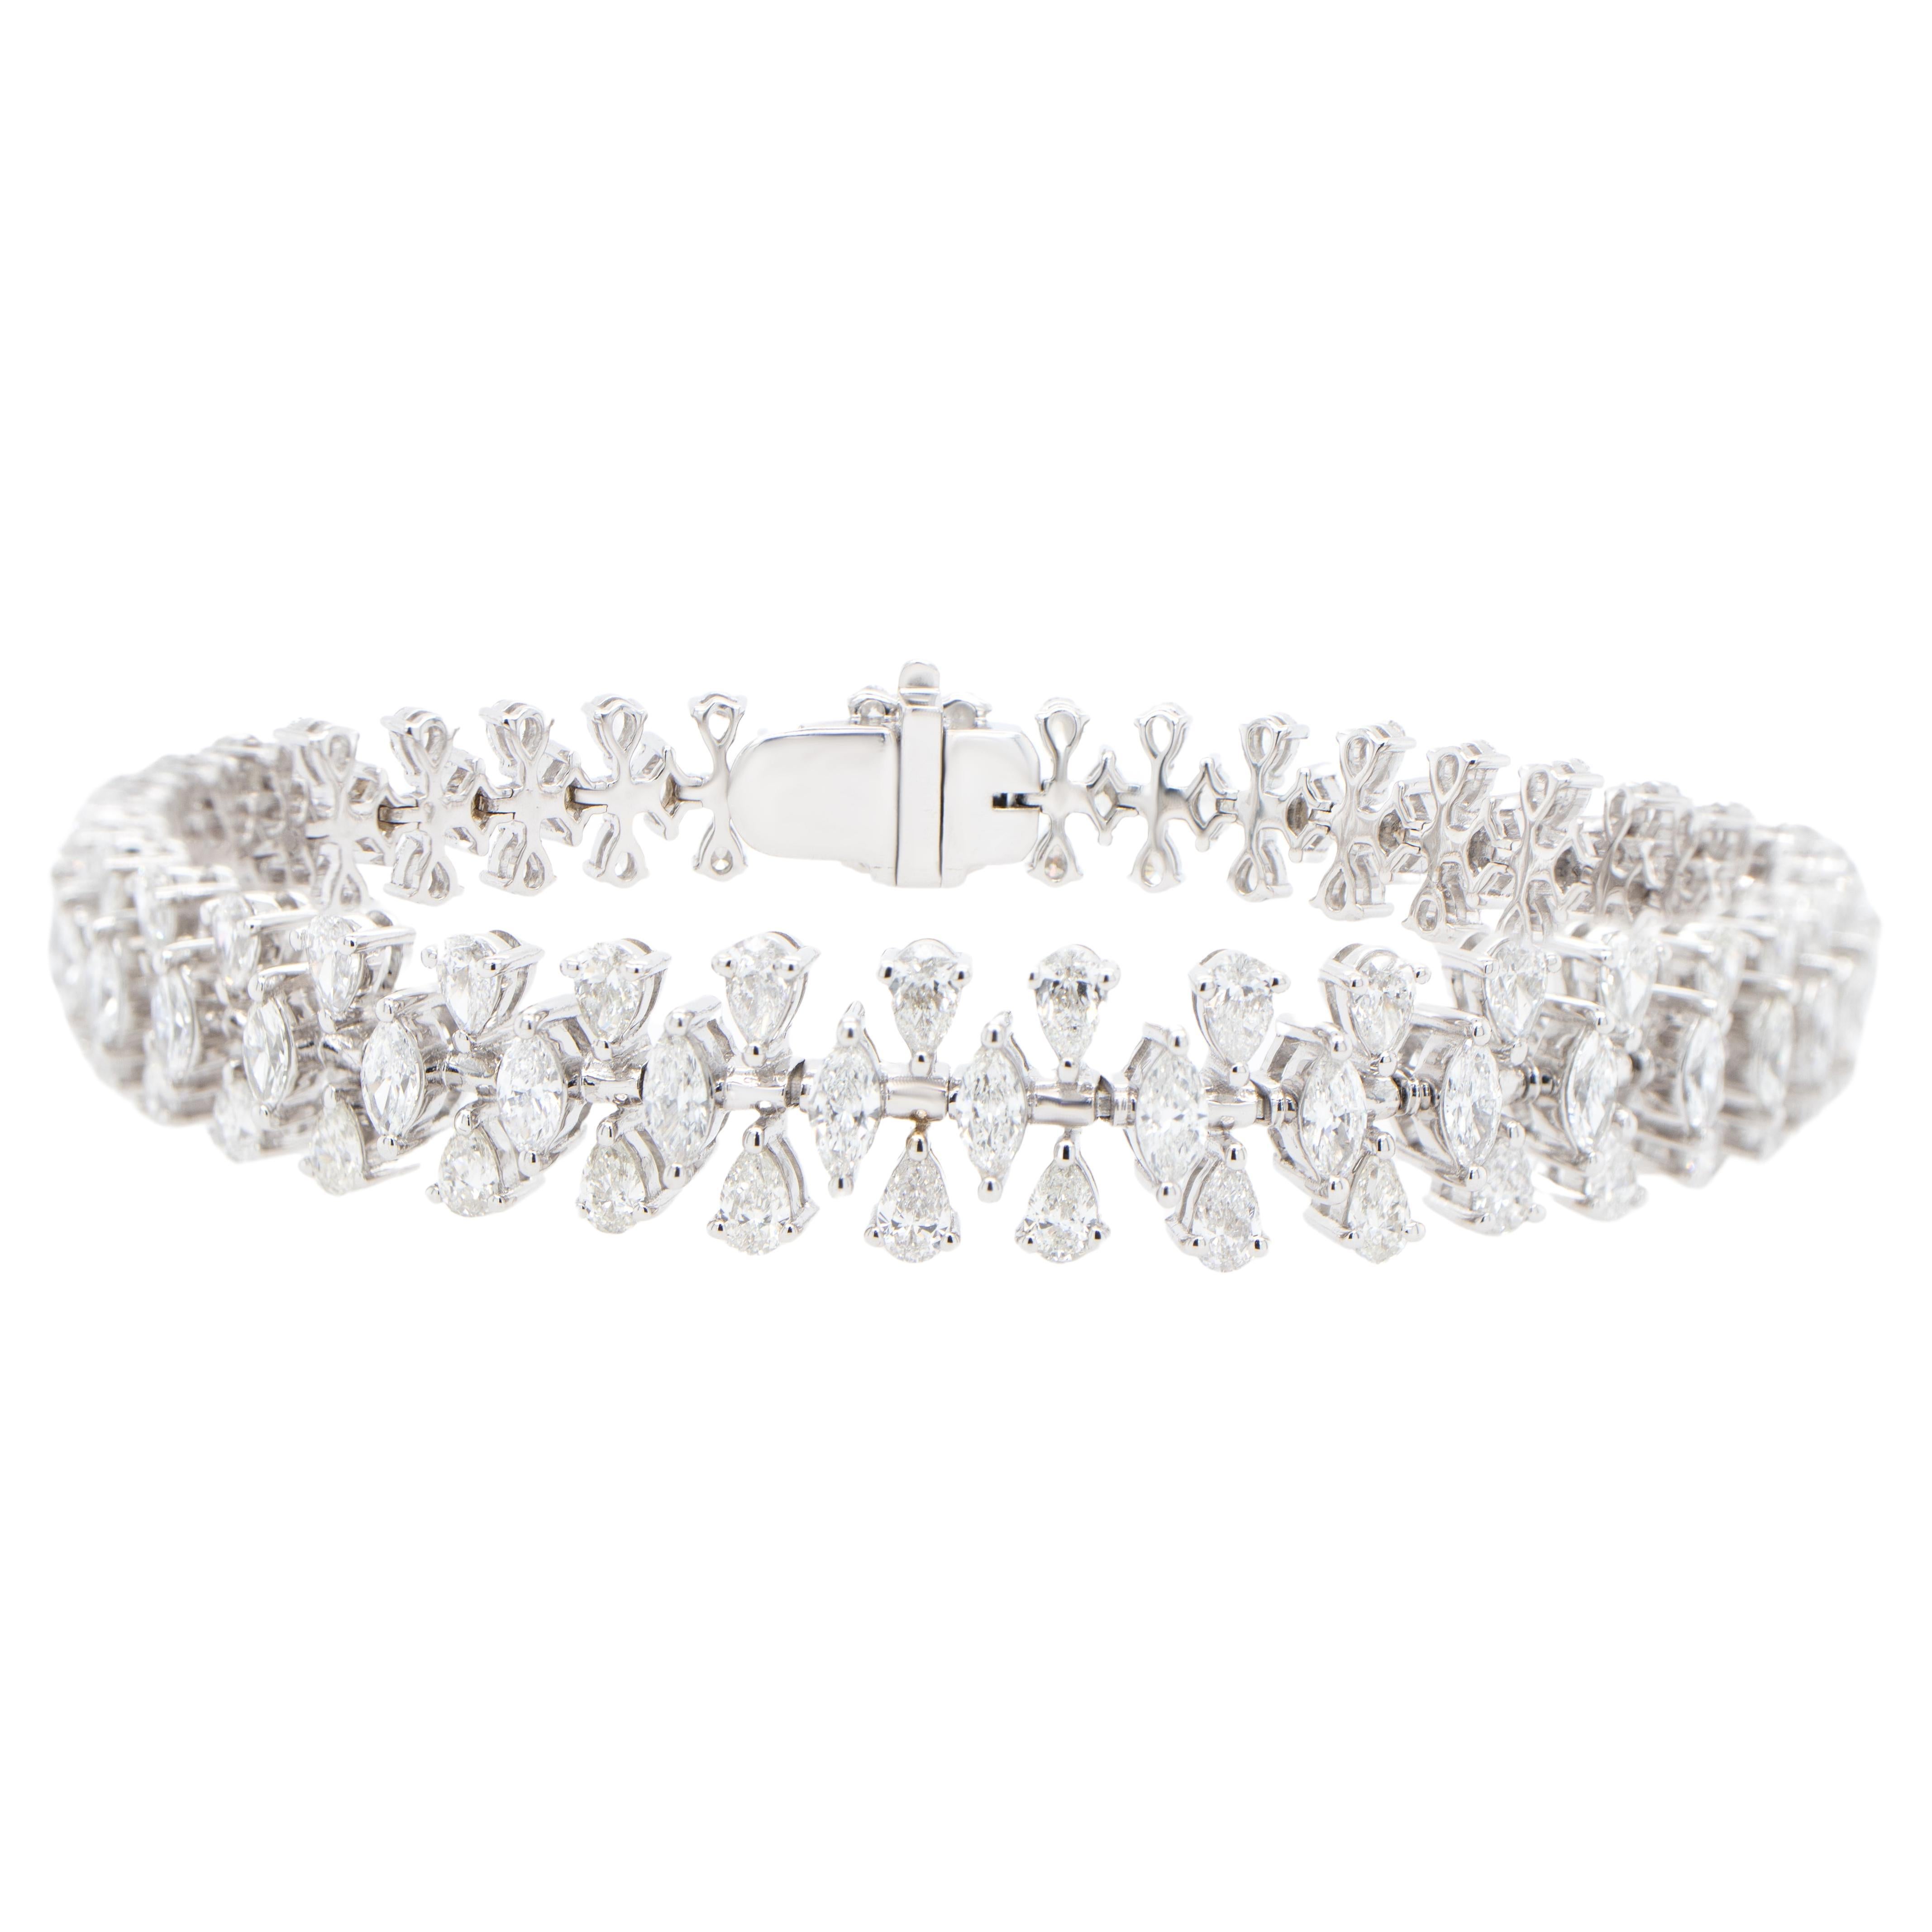 Important Marquise and Pear Cut Diamond Bracelet 6.65 Carats 18K White Gold